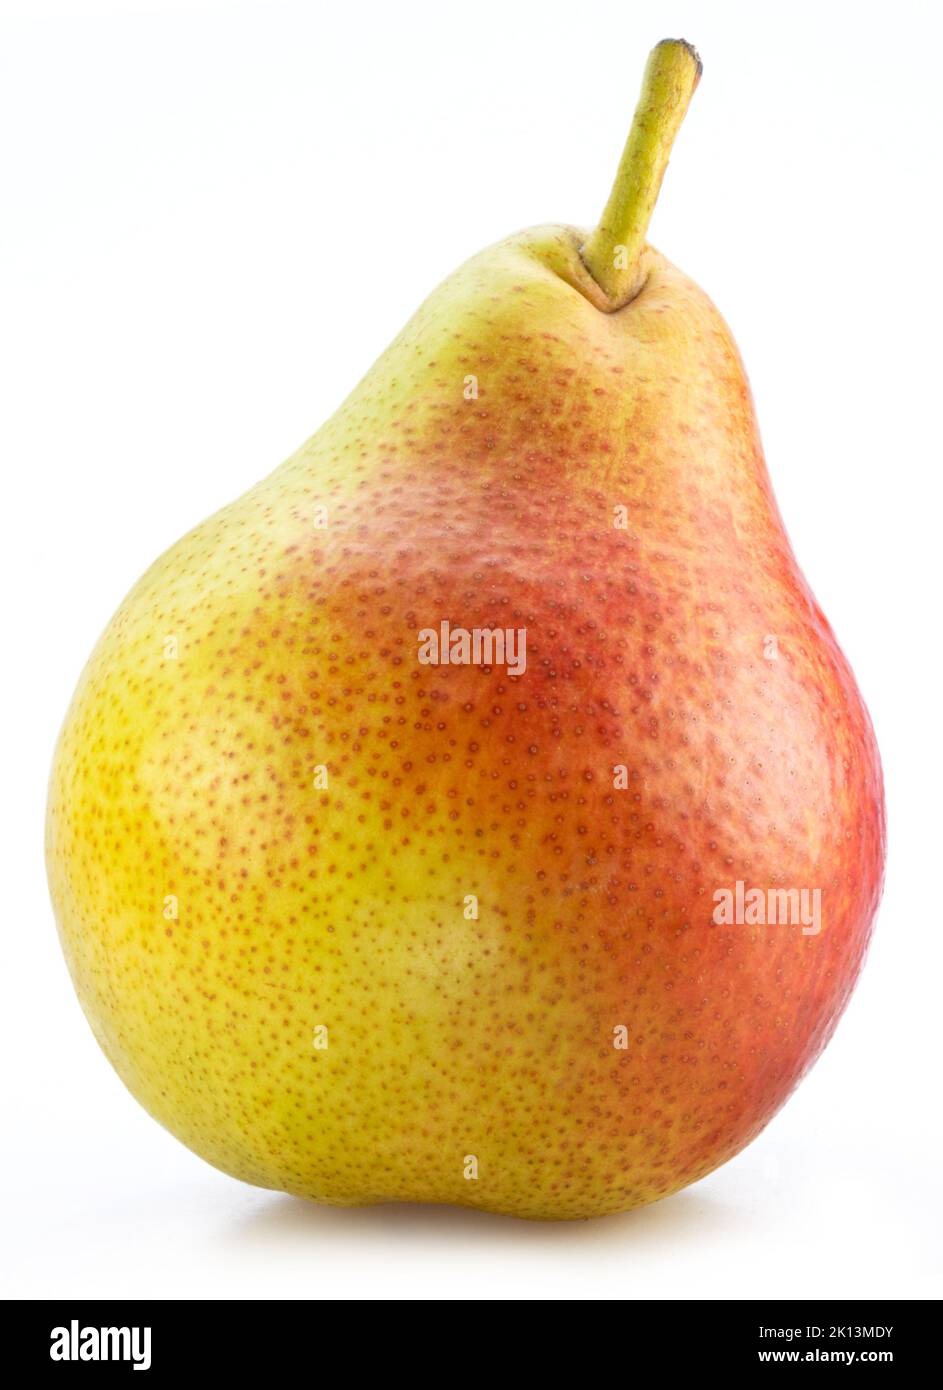 Ripe yellow pear with red side isolated on white background. Stock Photo